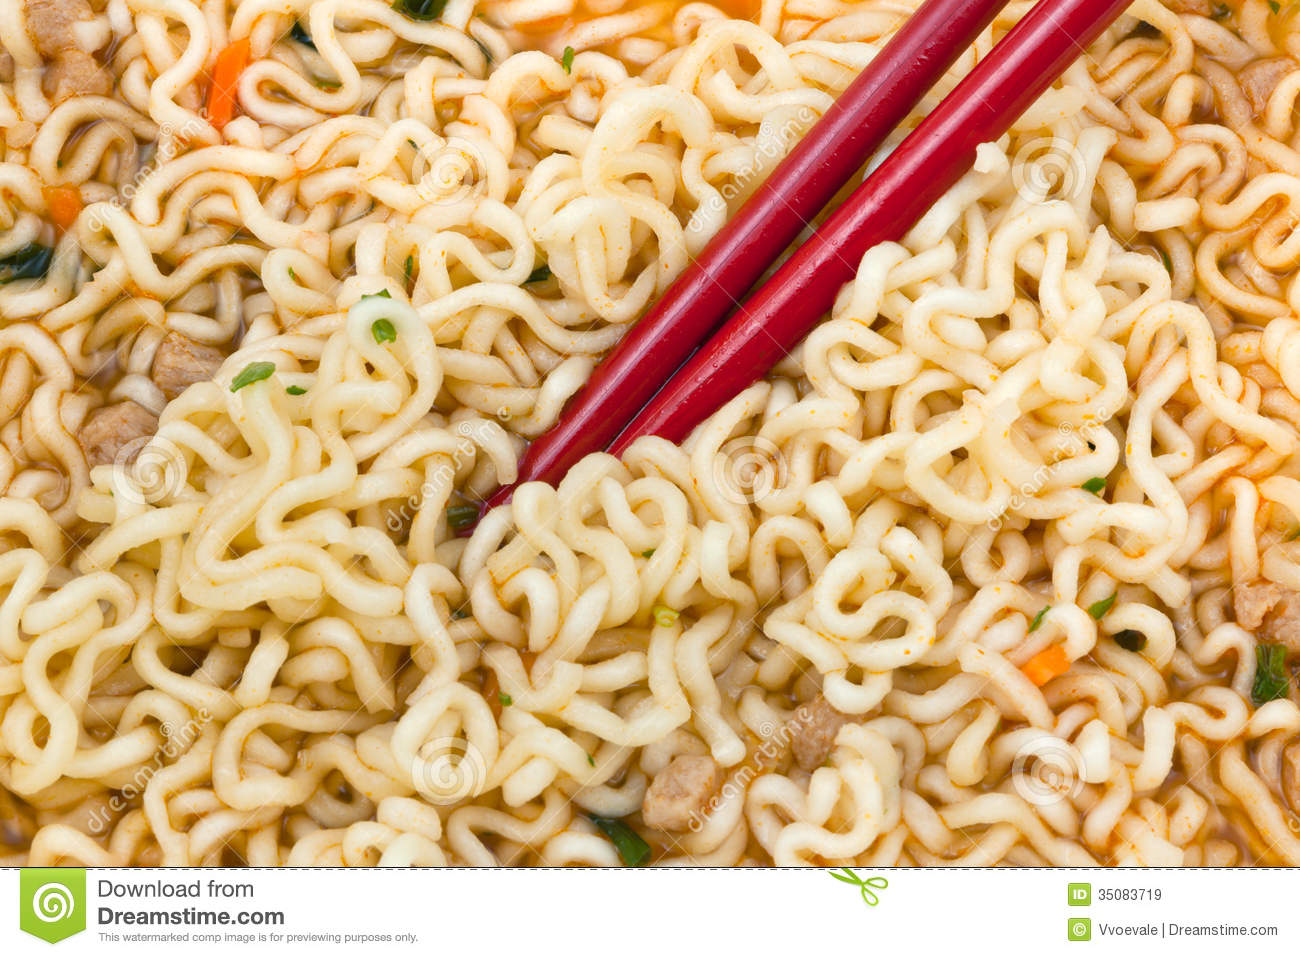 Eating Instant Noodles By Red Chopsticks Royalty Free Stock Images